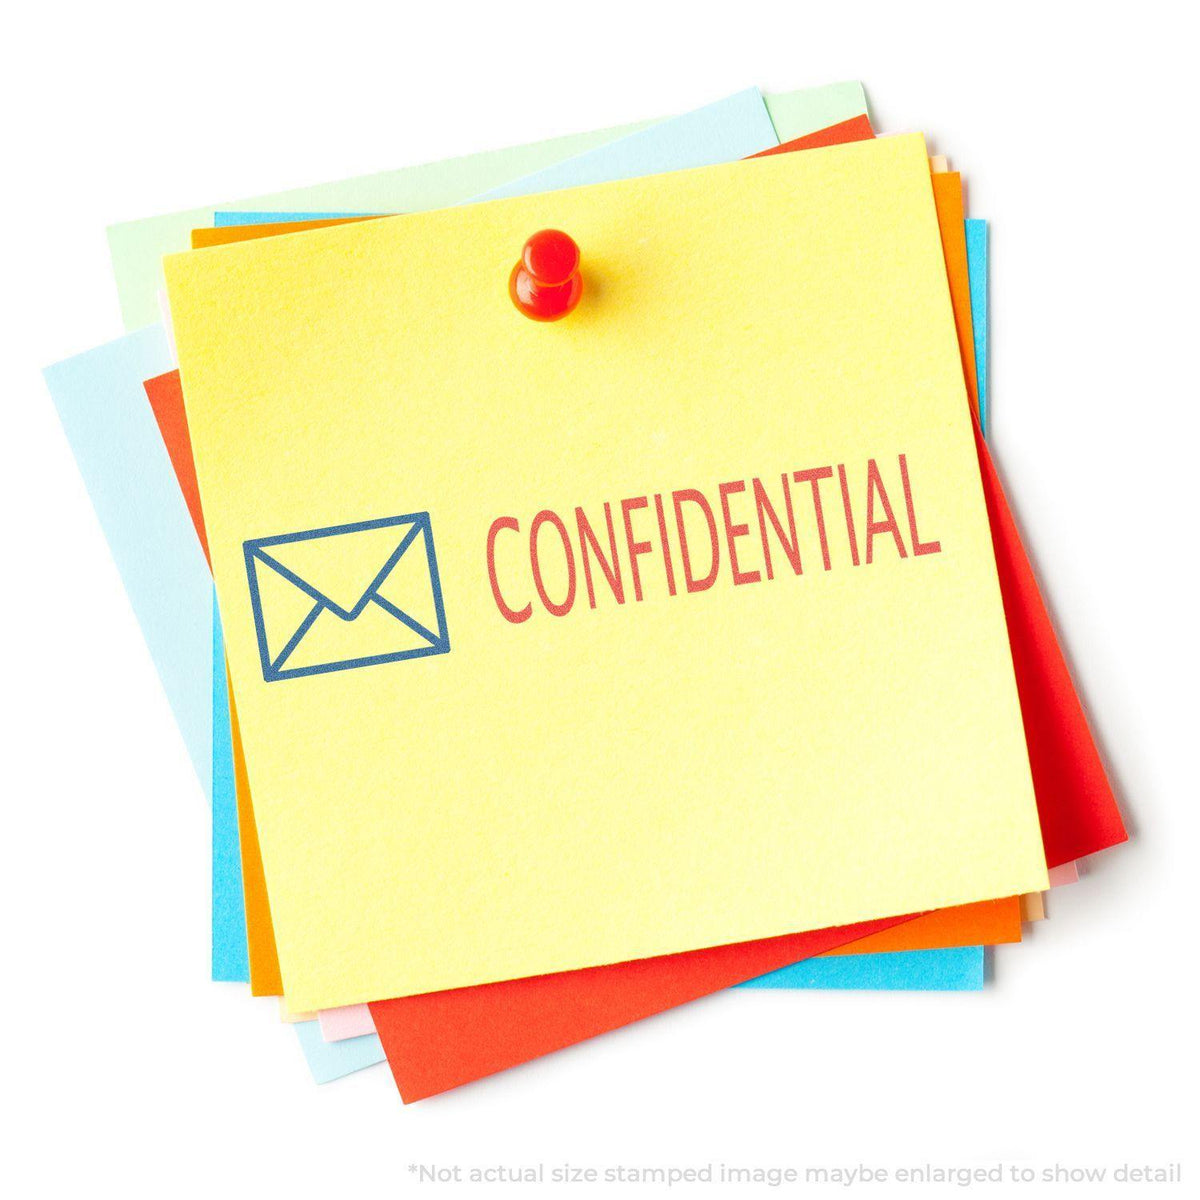 In Use Photo of Two-color Confidential Xstamper Stamp